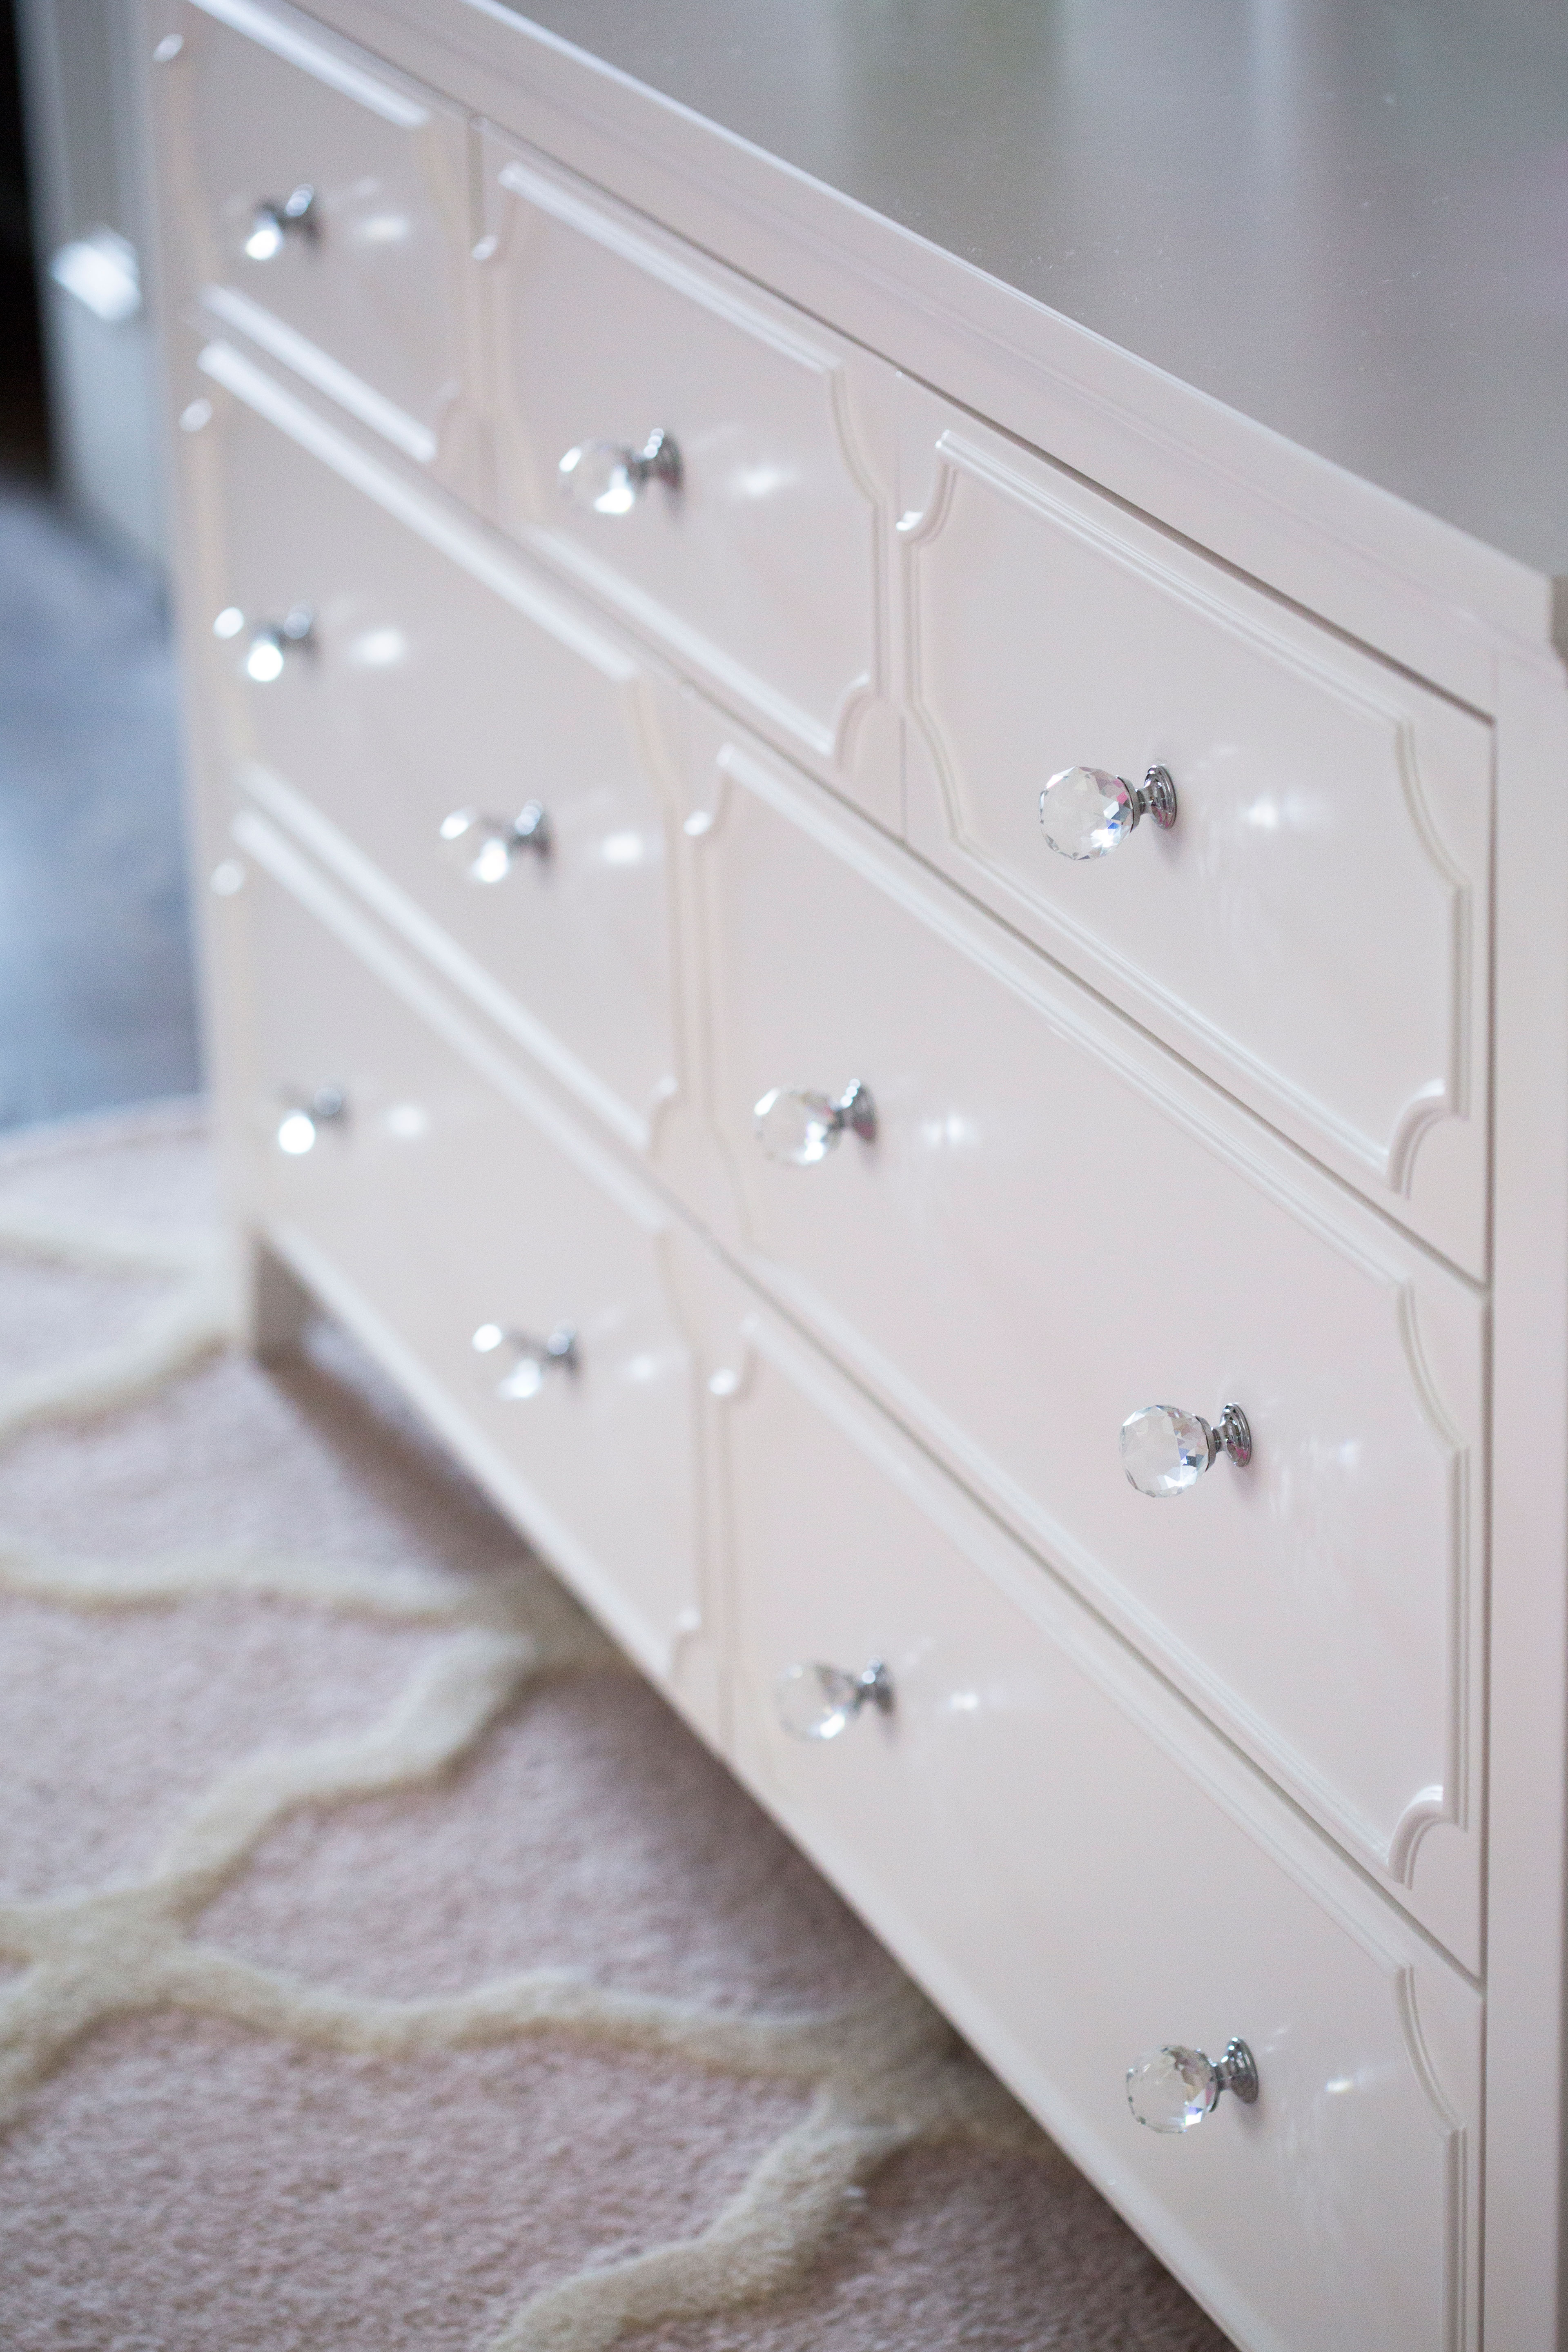 3 Over 4 Drawer Dresser White Craft Bedroom Furniture throughout dimensions 3840 X 5760